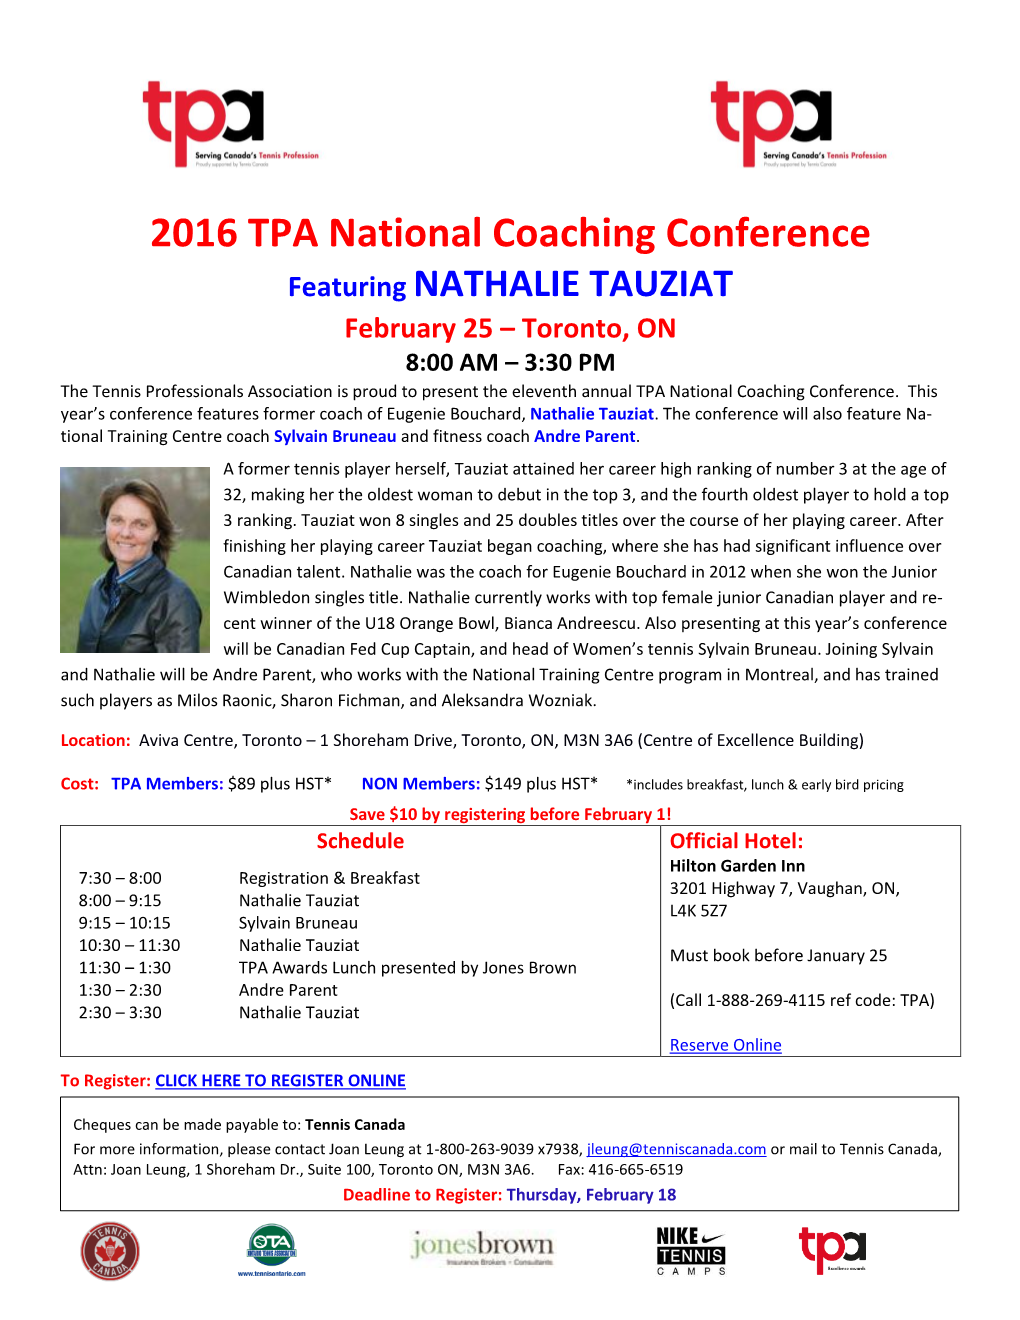 TPA National Coaching Conference Featuring NATHALIE TAUZIAT